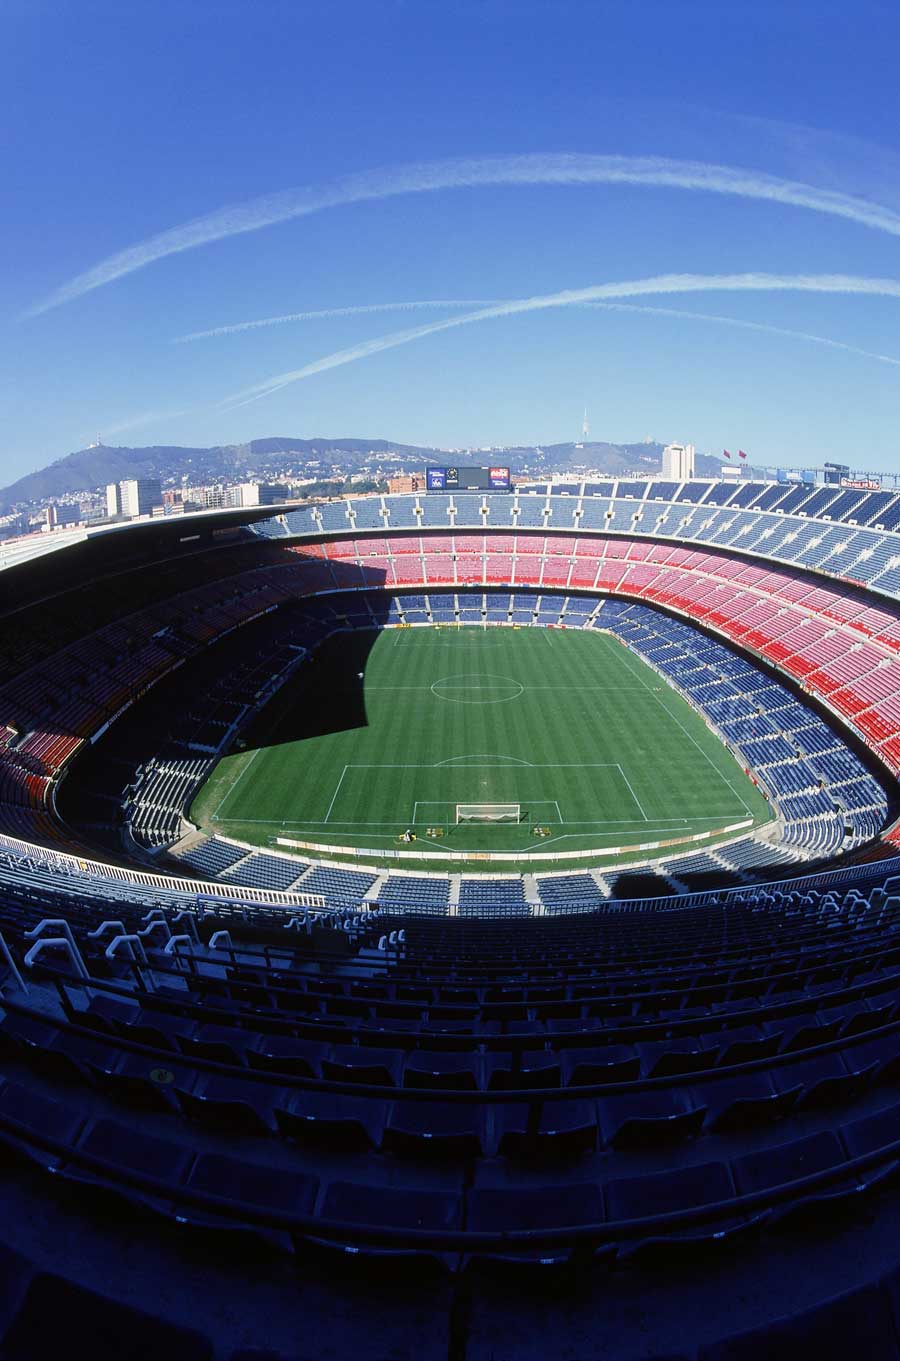 A general view of the Nou Camp stadium